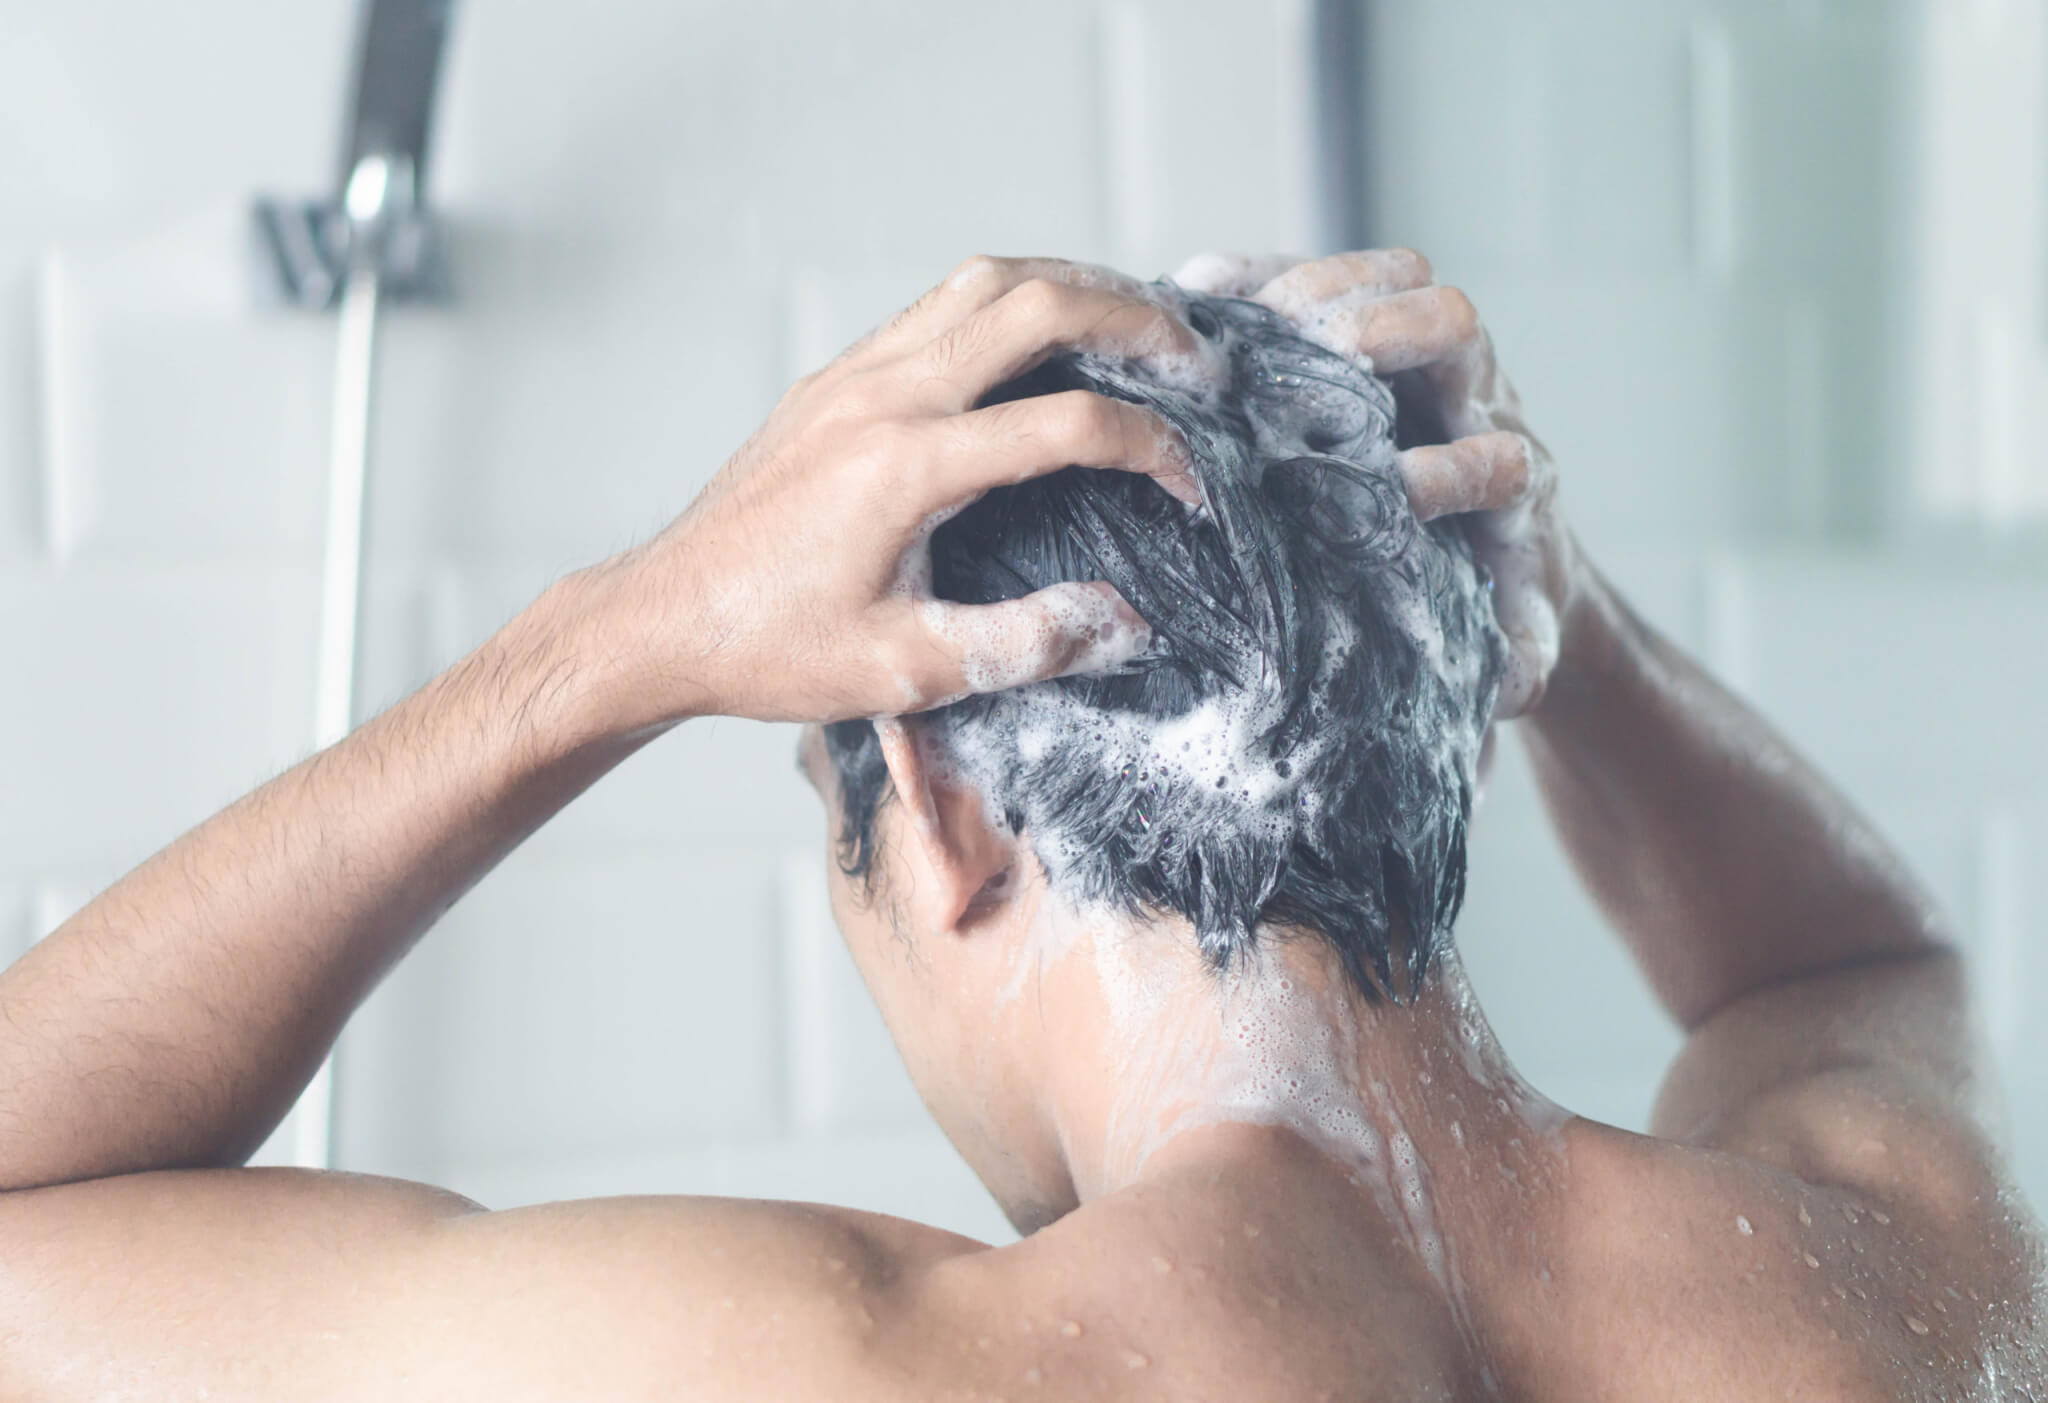 Man shampooing his hair in the shower